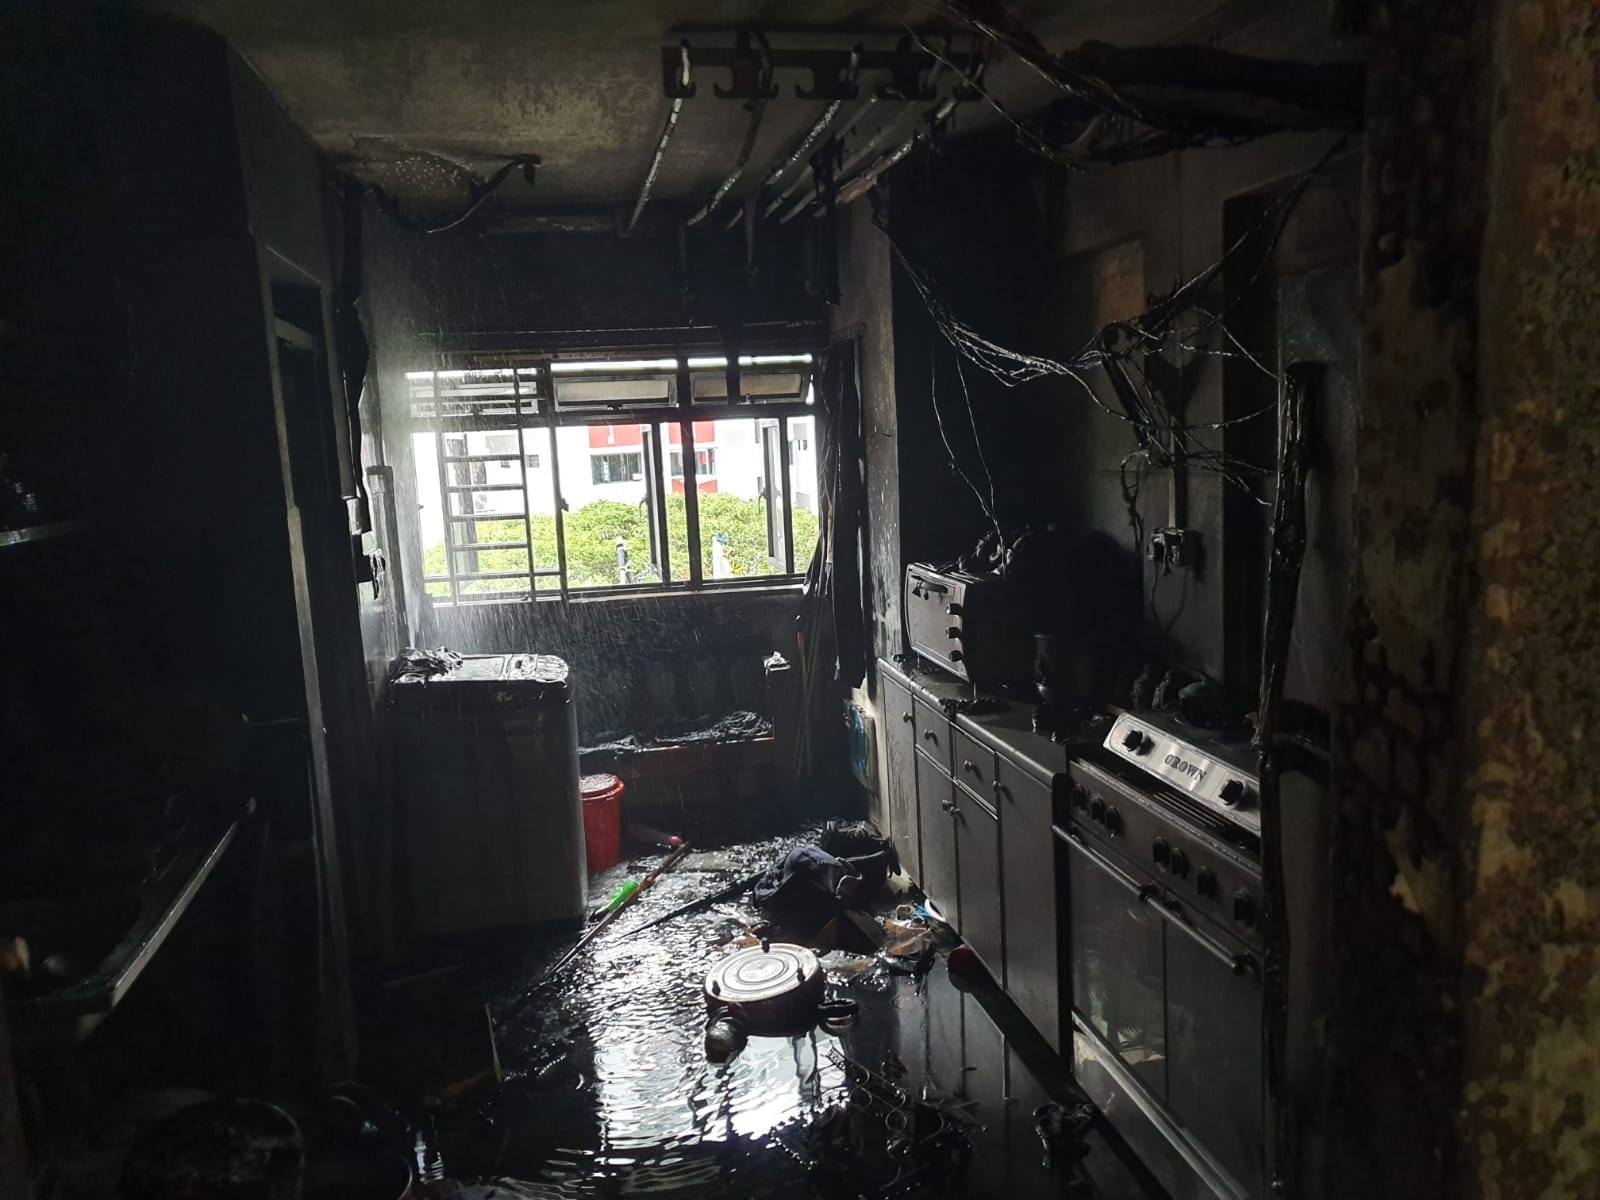 Aftermath of a fire in Ang Mo Kio on Jul 22. (Photo: SCDF)